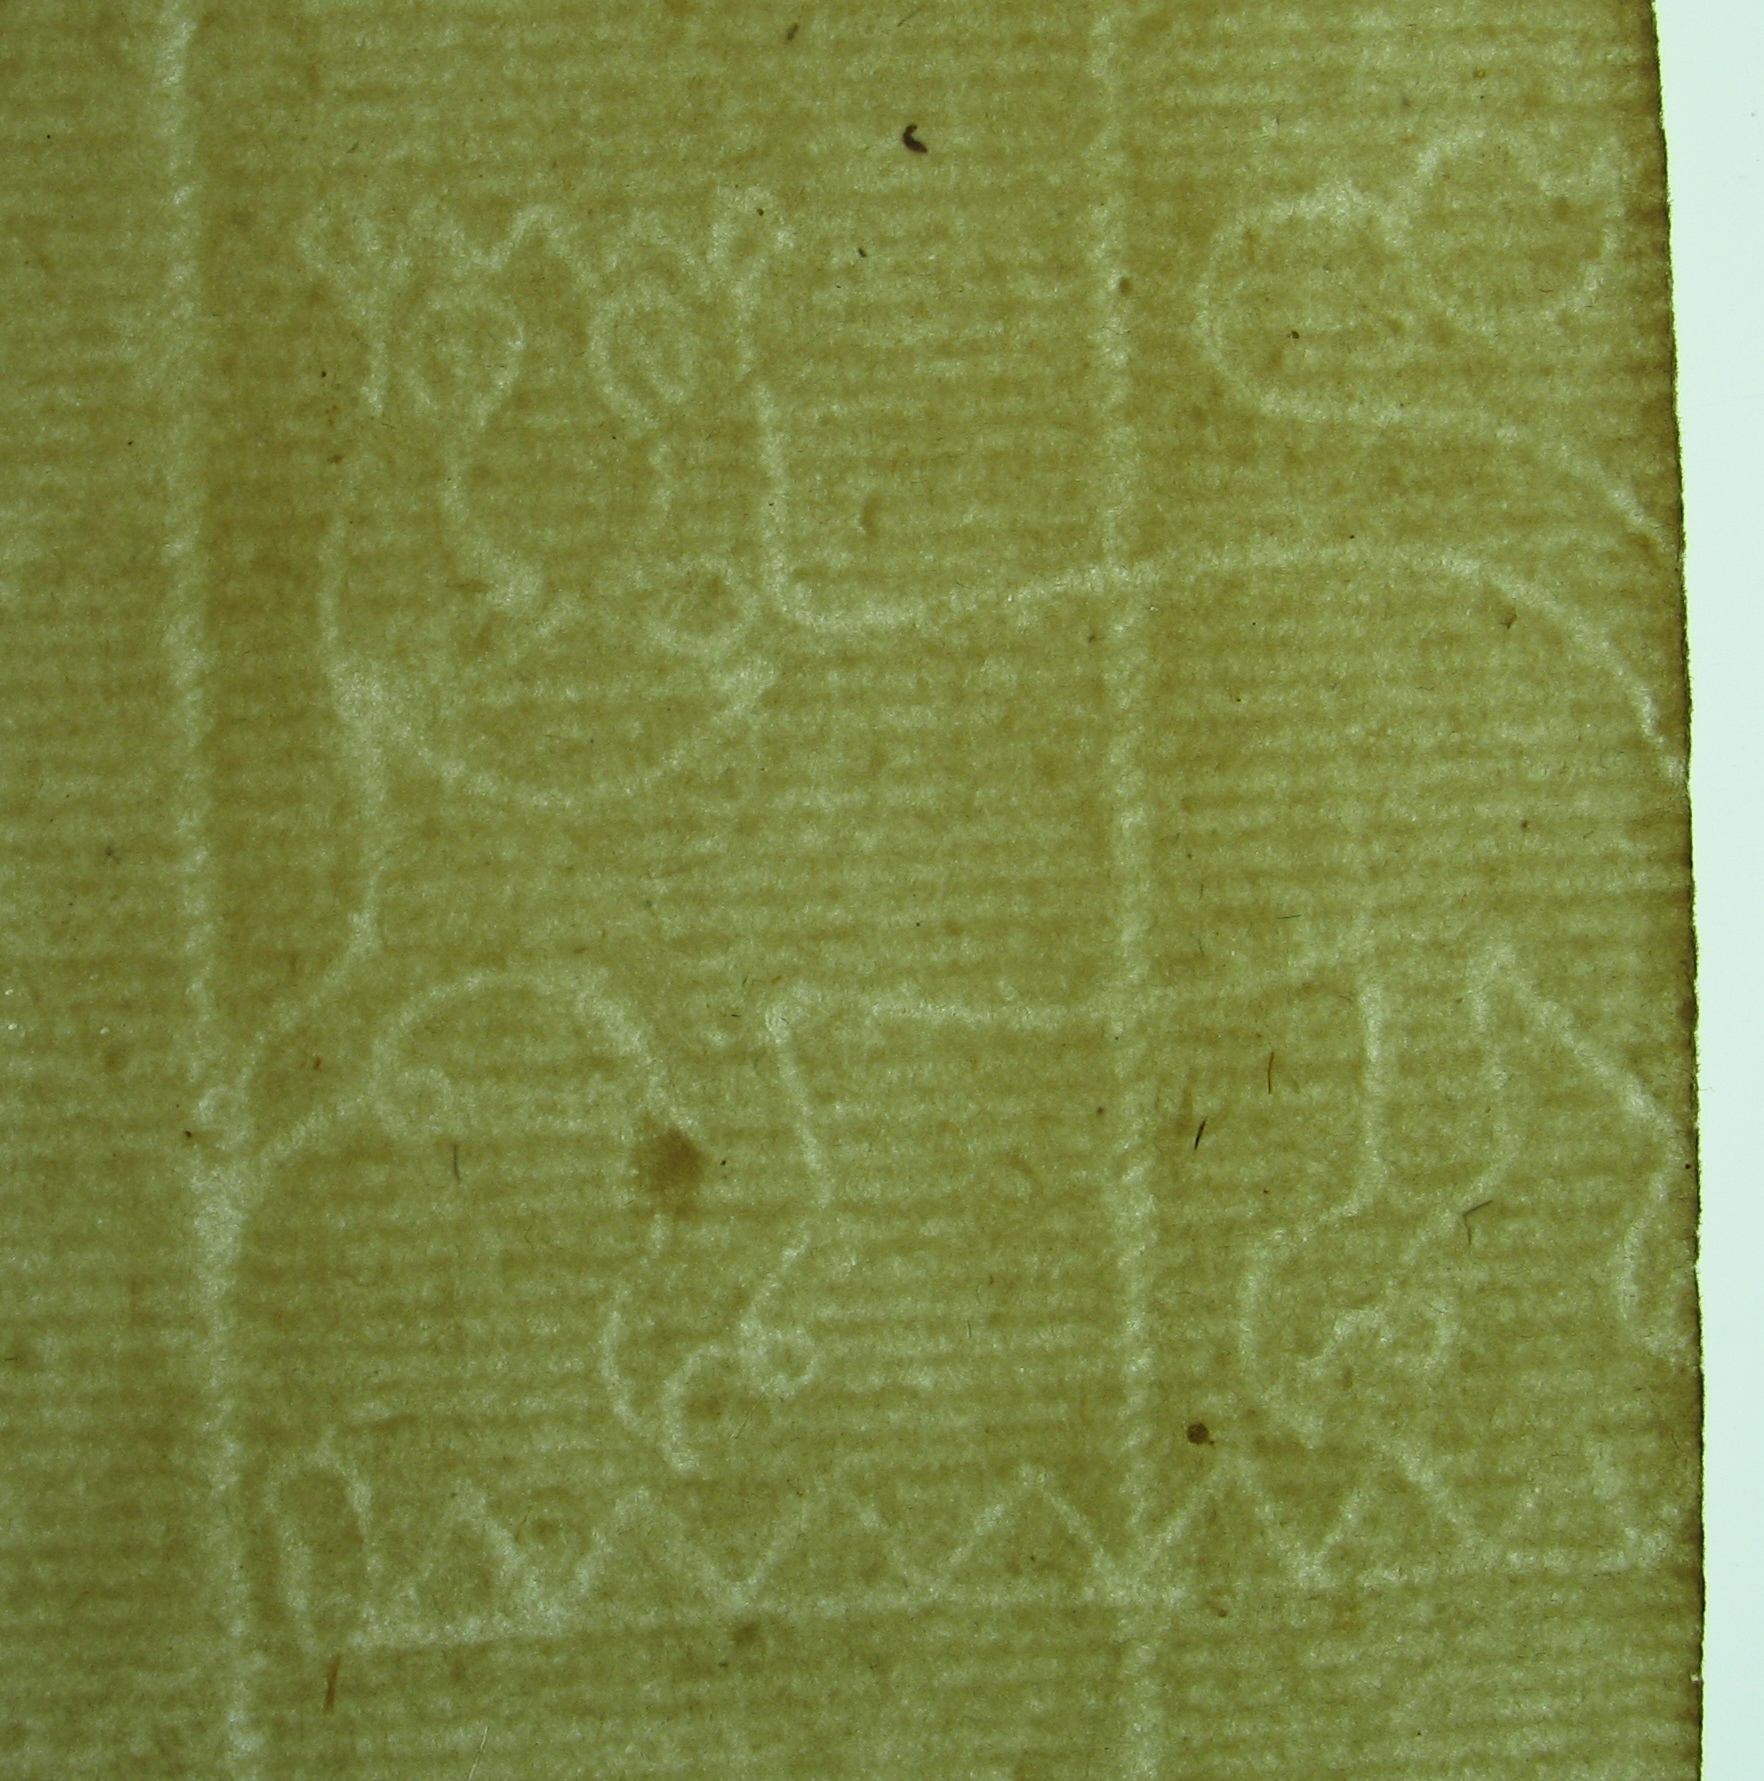 Lion passant guardant watermark in back flyleaf of Isl. Ms. 463 v.2